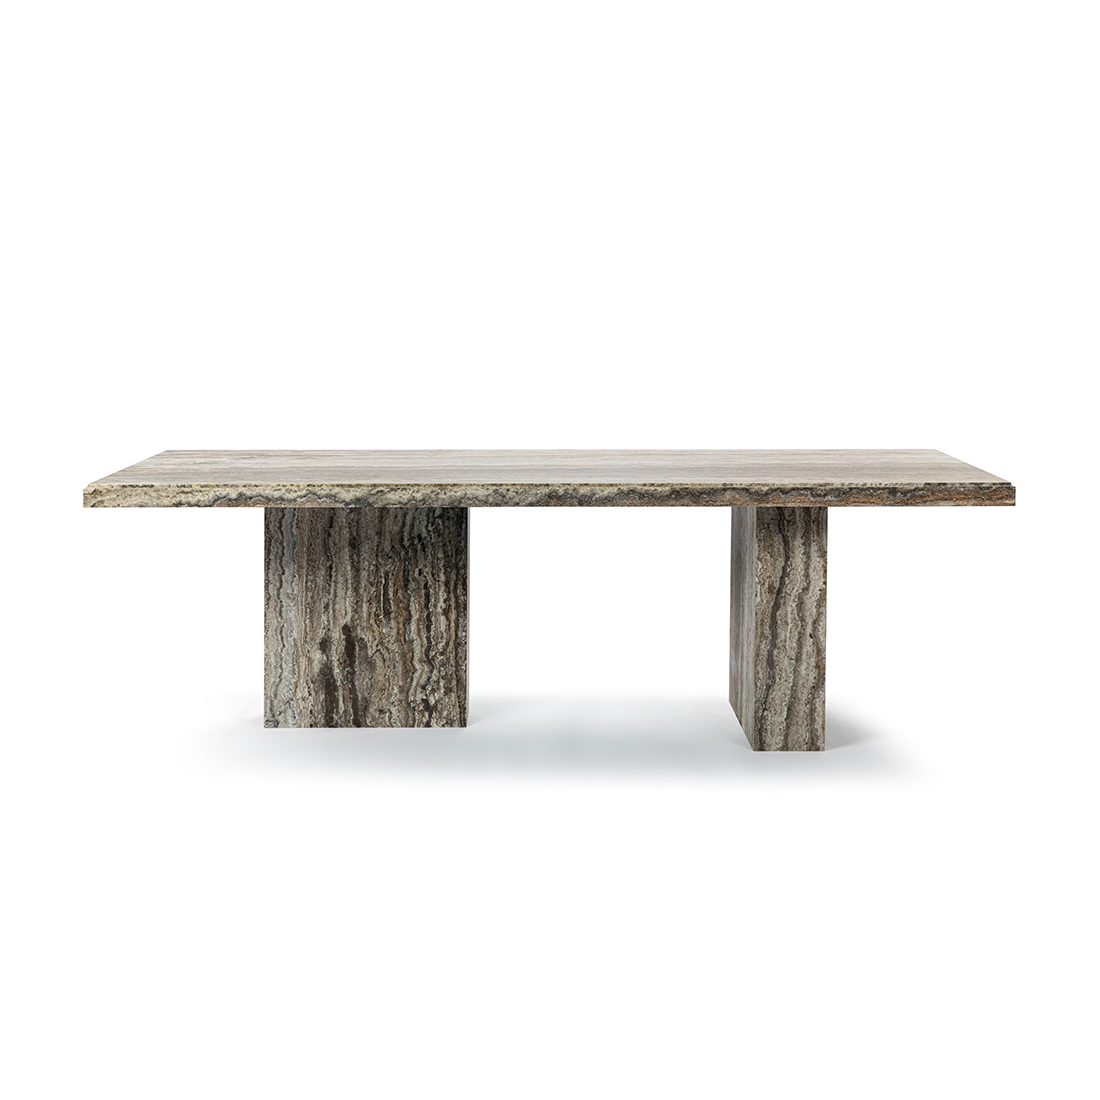 August Rectangle Travertine Dining Table with Block Legs